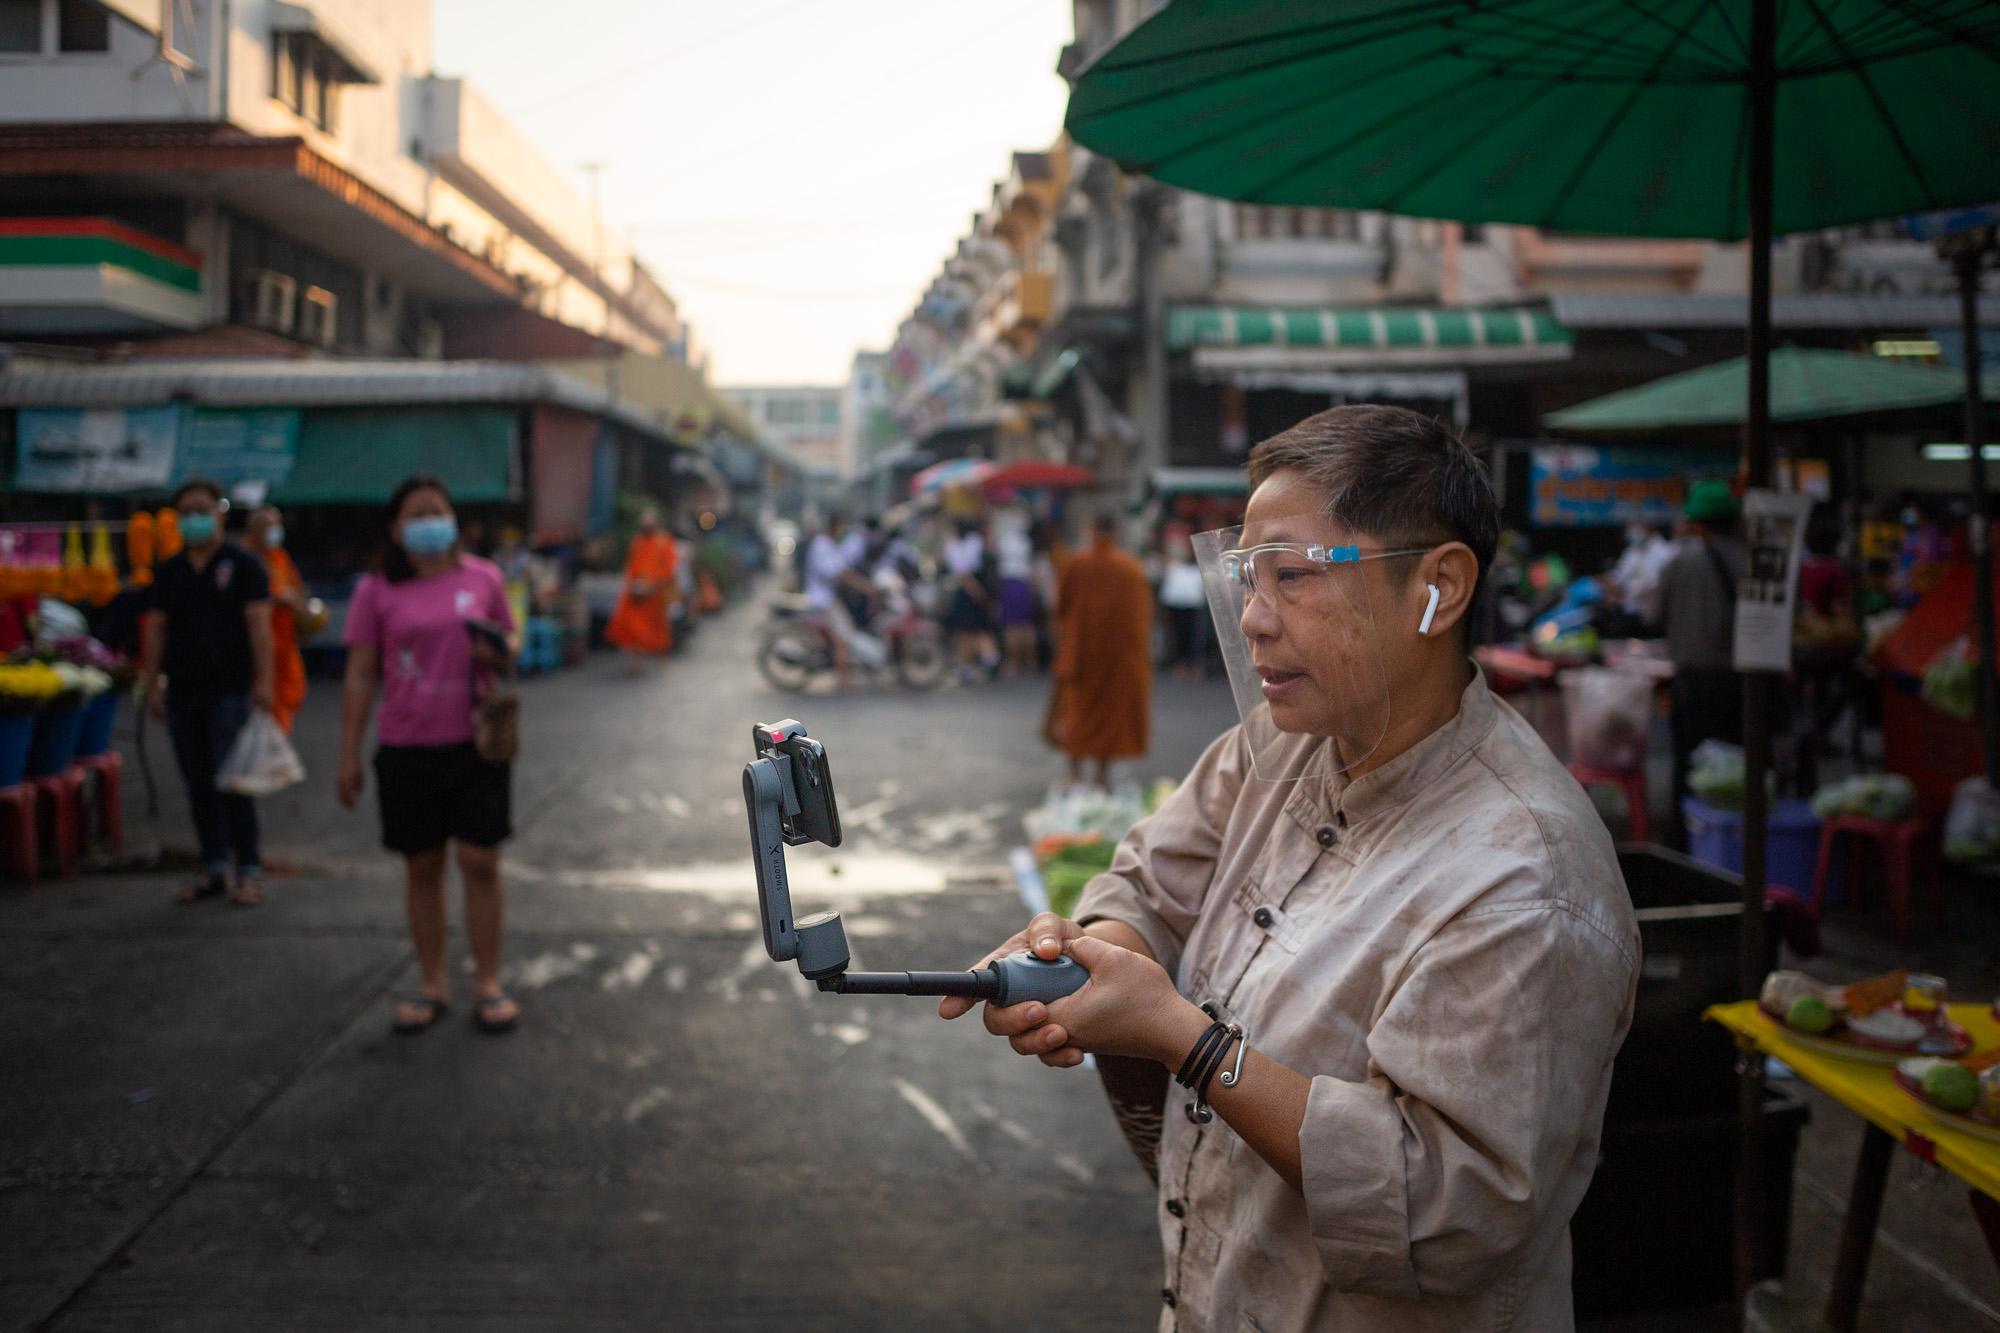 Hnoi Latthitham, 53, speaks to participants of a virtual tour of Chai Chimplee Temple Market in Bangkok, Thailand, February 2021.